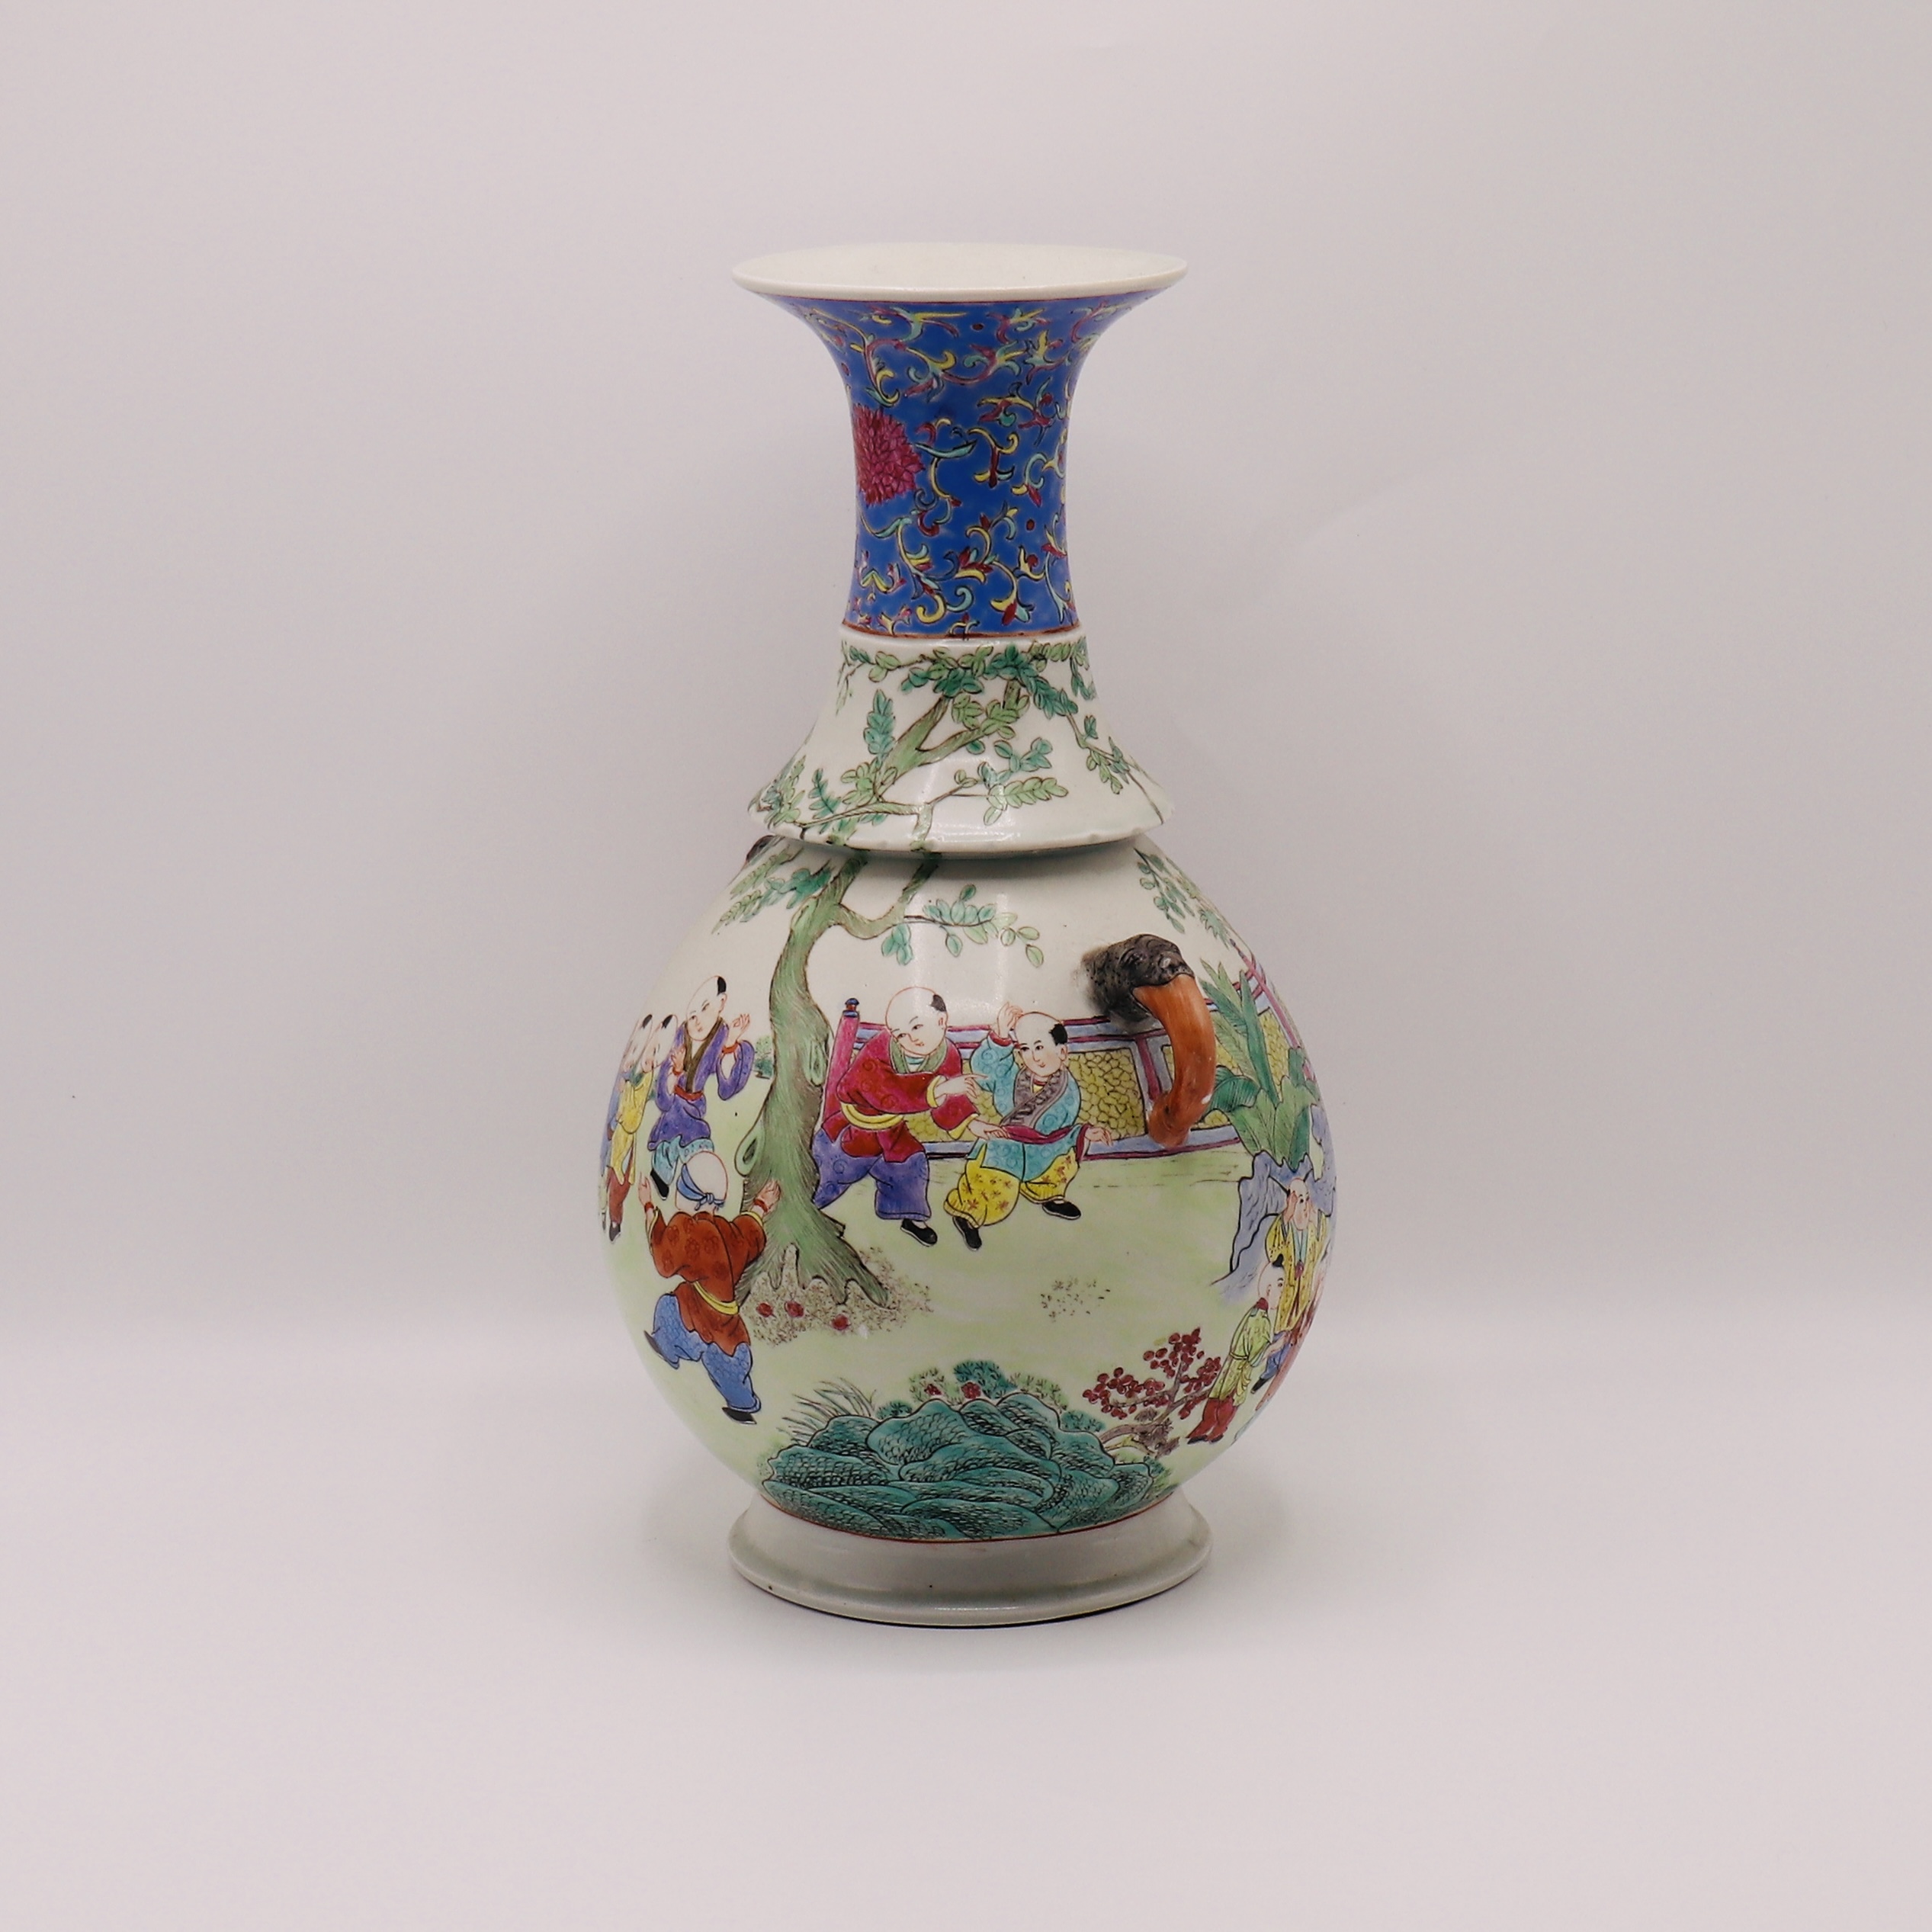 A LARGE CHINESE FAMILLE ROSE VASE, QING DYNASTY (1644-1911) - Image 2 of 5